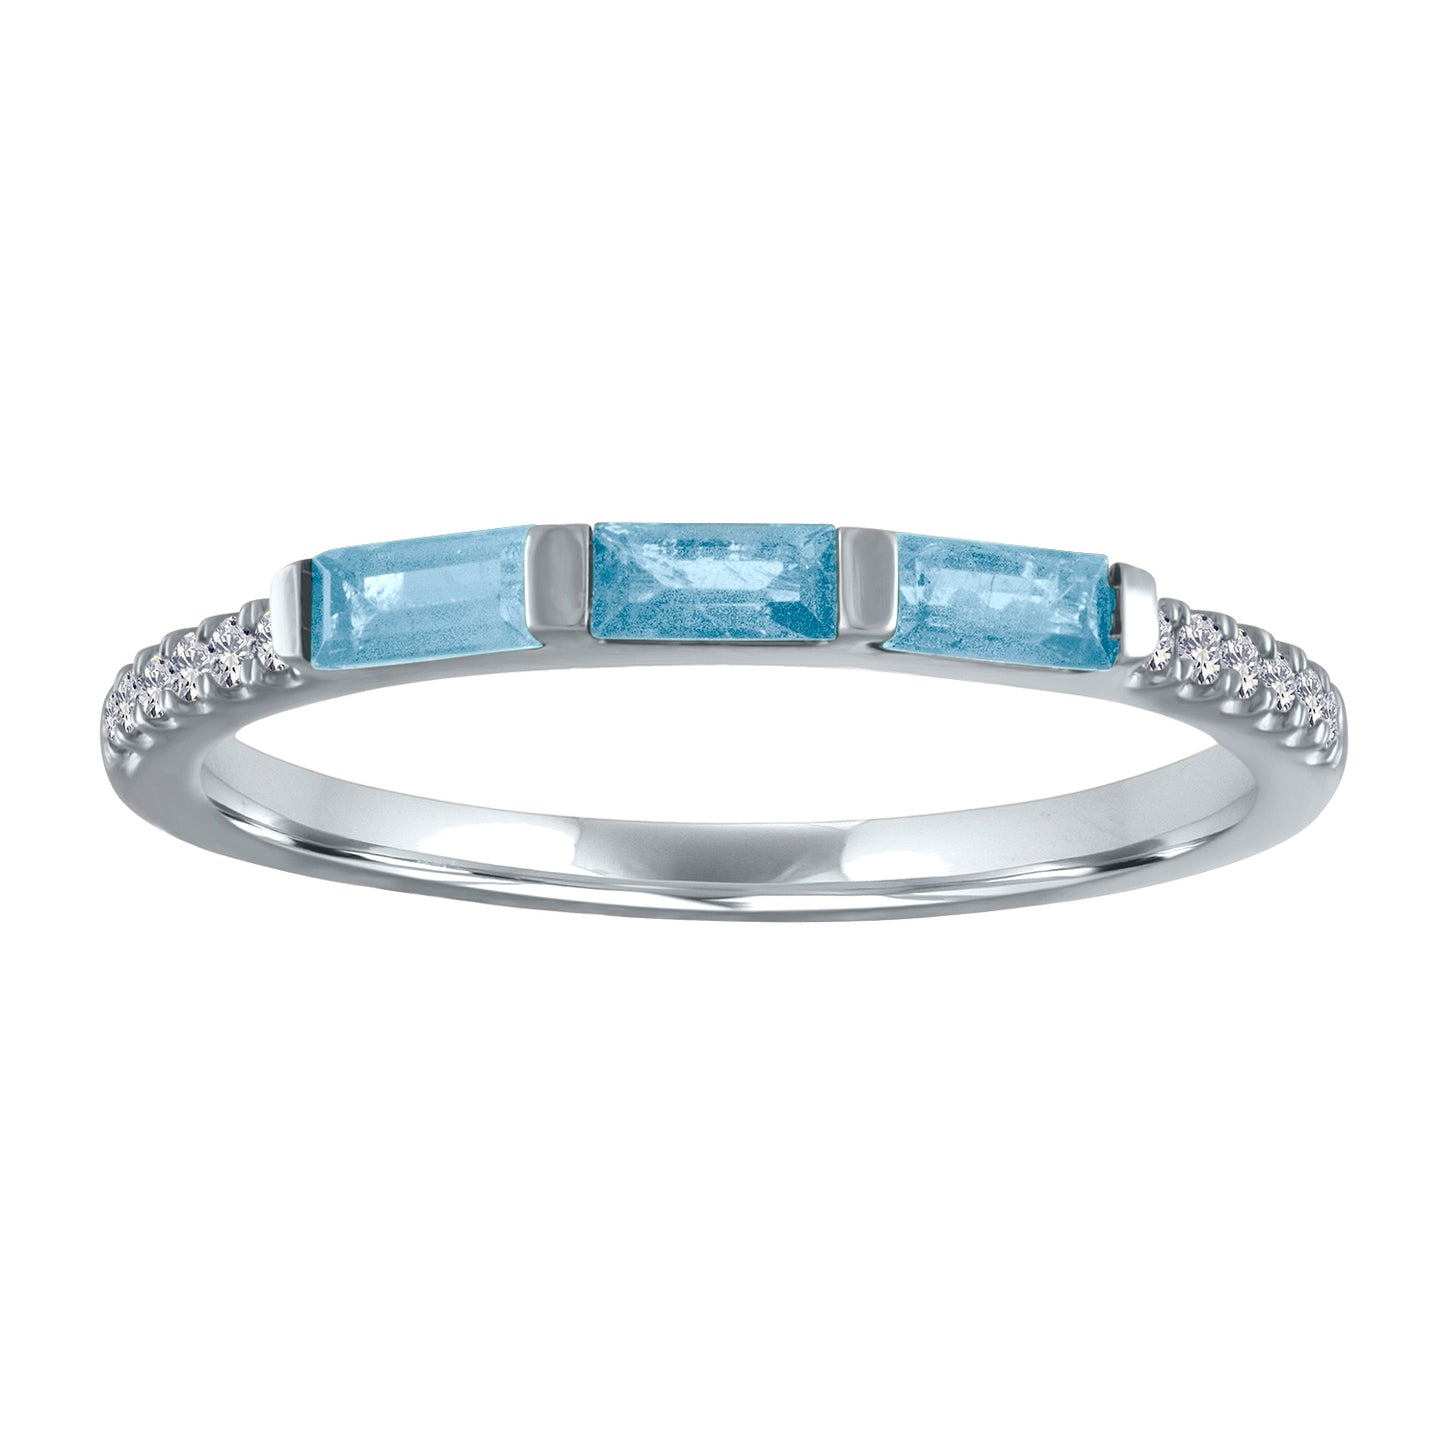 White gold skinny band with three aquamarine baguettes and round diamonds on the shank.